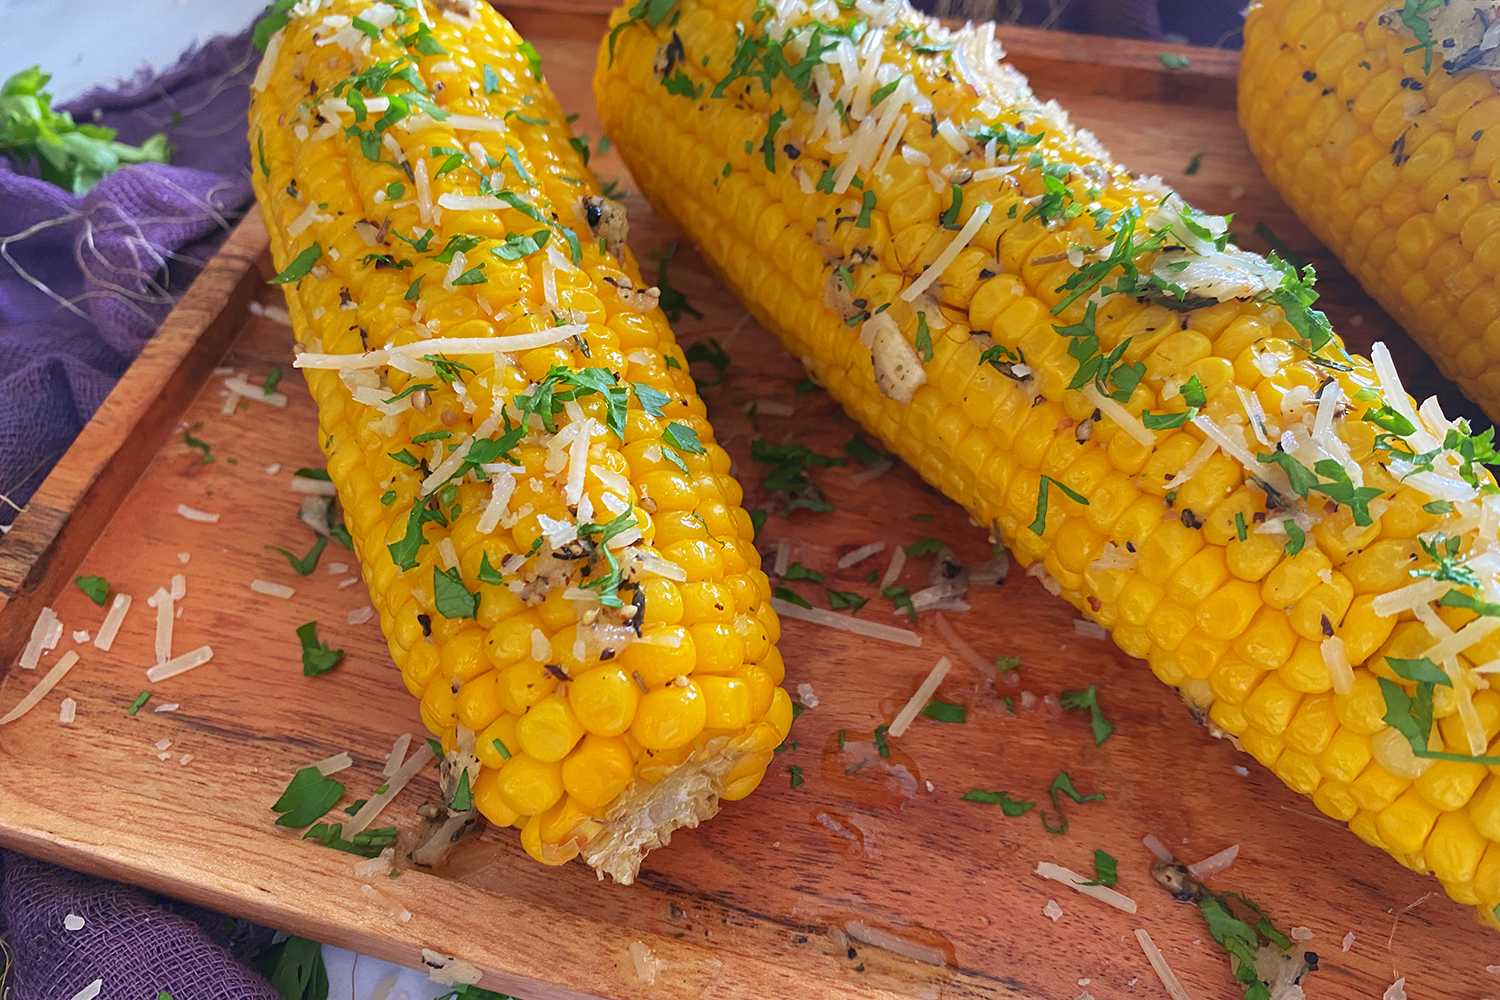 Two ears of corn topped with cheese, salt and chopped parsley on a cutter board